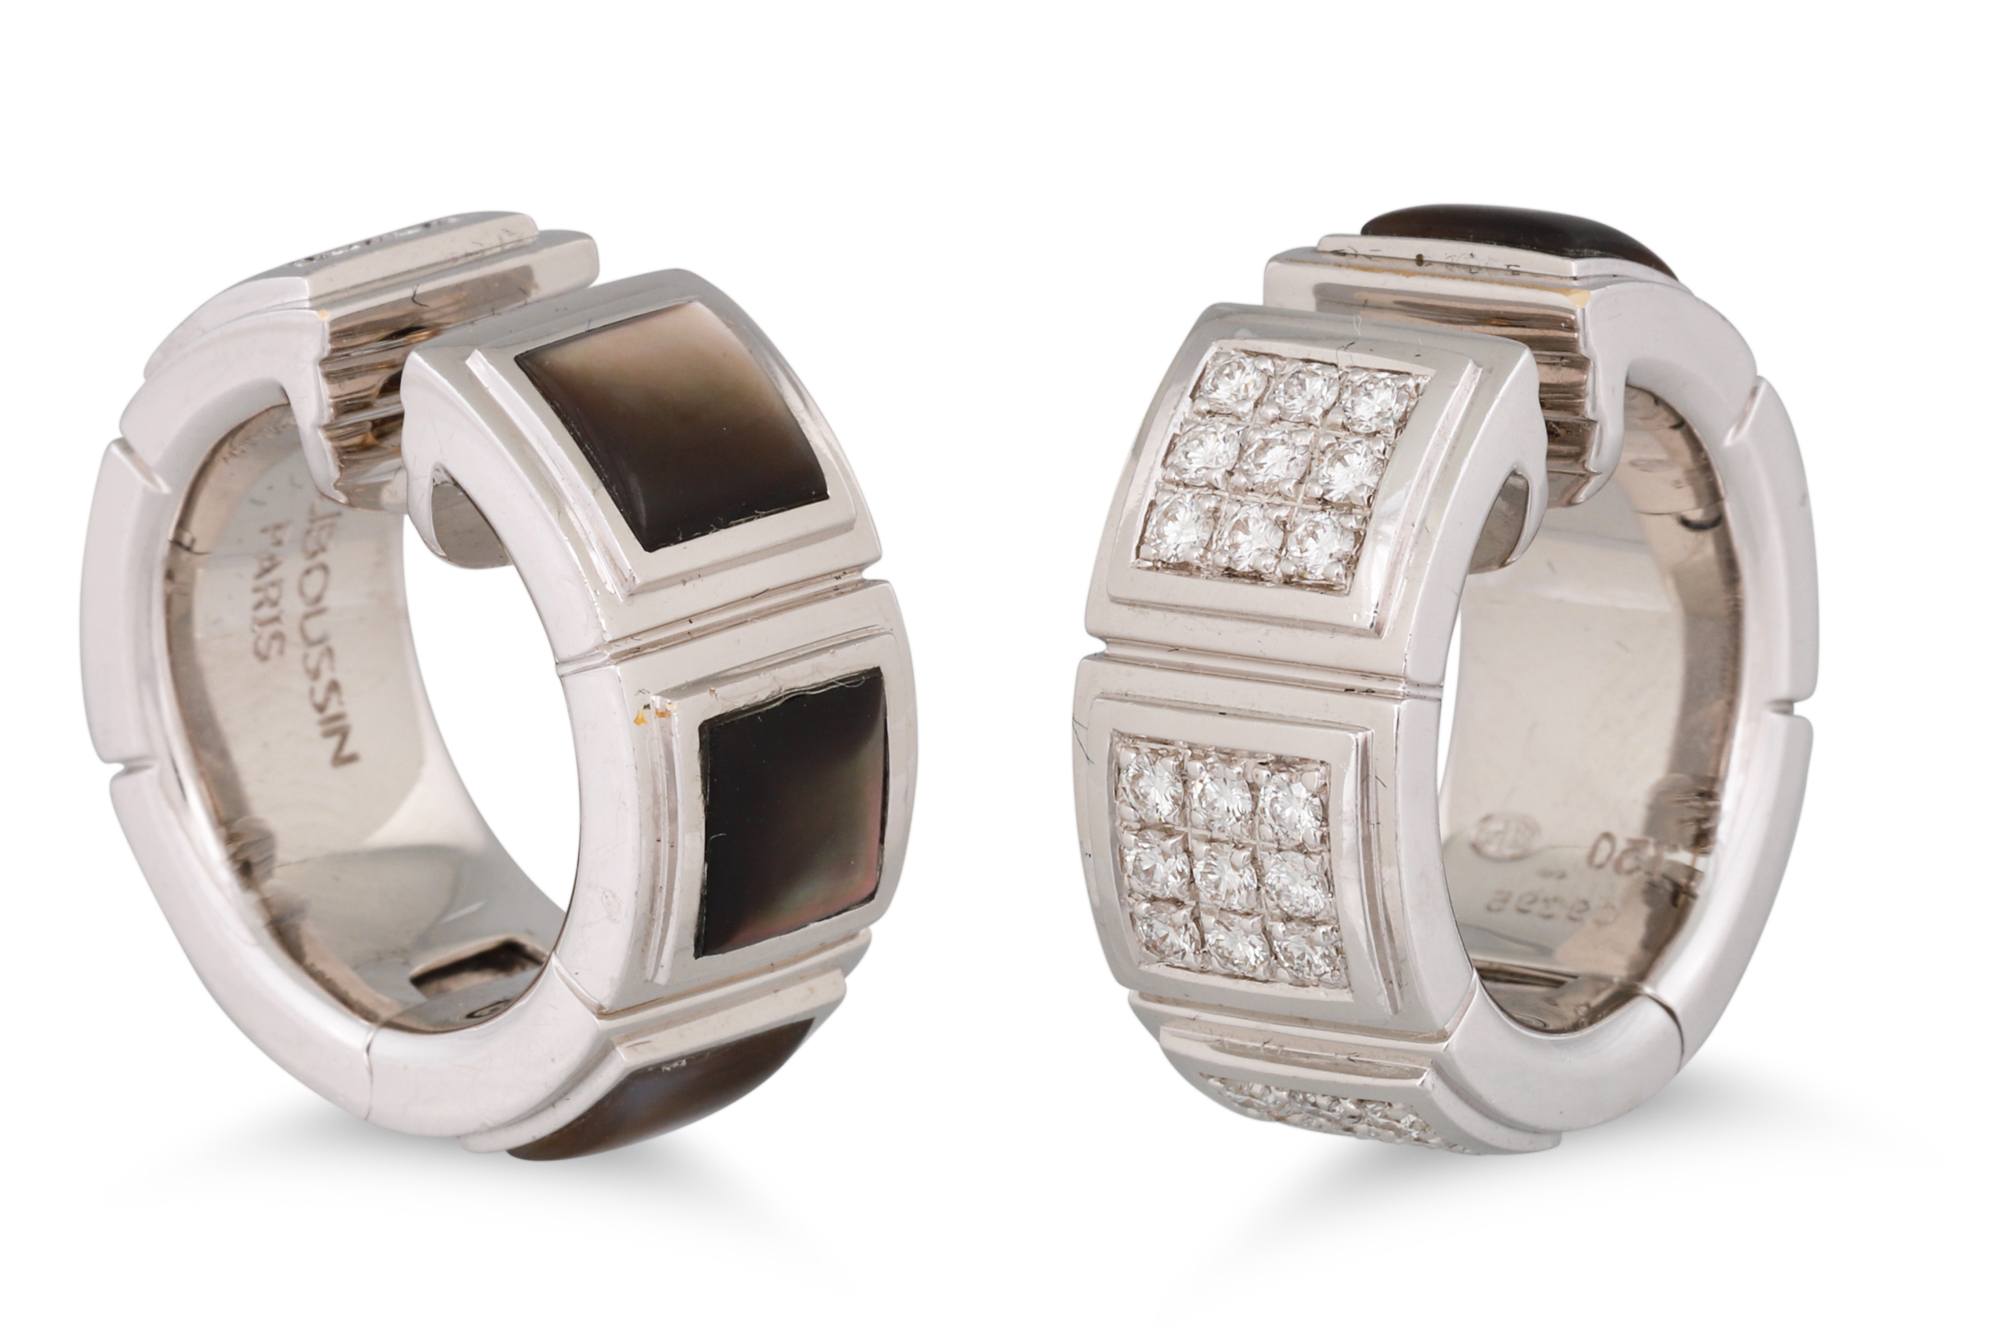 A PAIR OF MAUBOUSSIN DIAMOND AND MOTHER OF PEARL EARRINGS, pavé set diamonds, in 18ct white gold, - Image 2 of 2